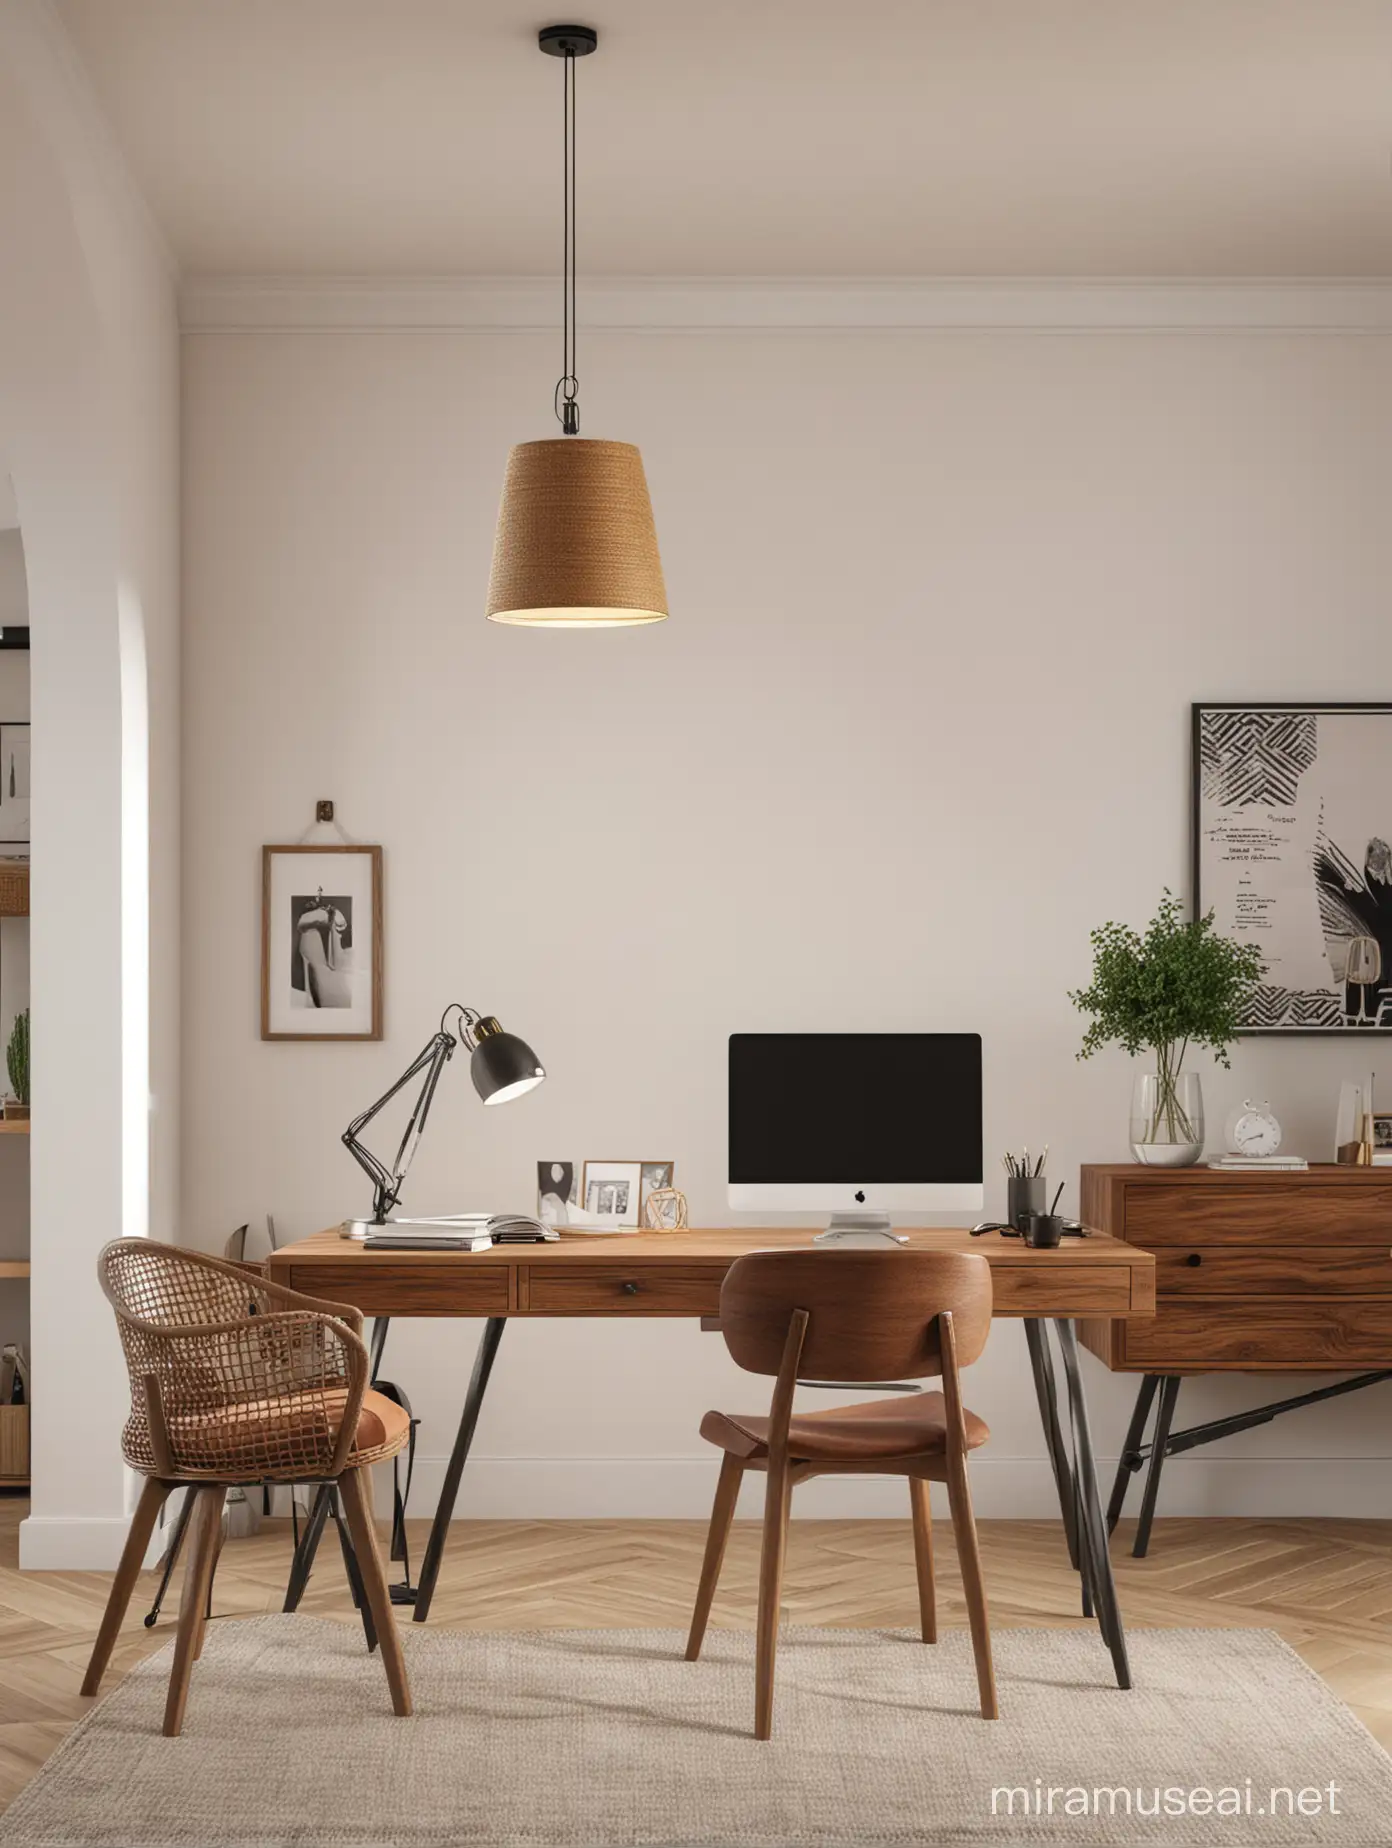 Modern AndalusianInspired Home Office with Minimalist Design and Stylish Lighting